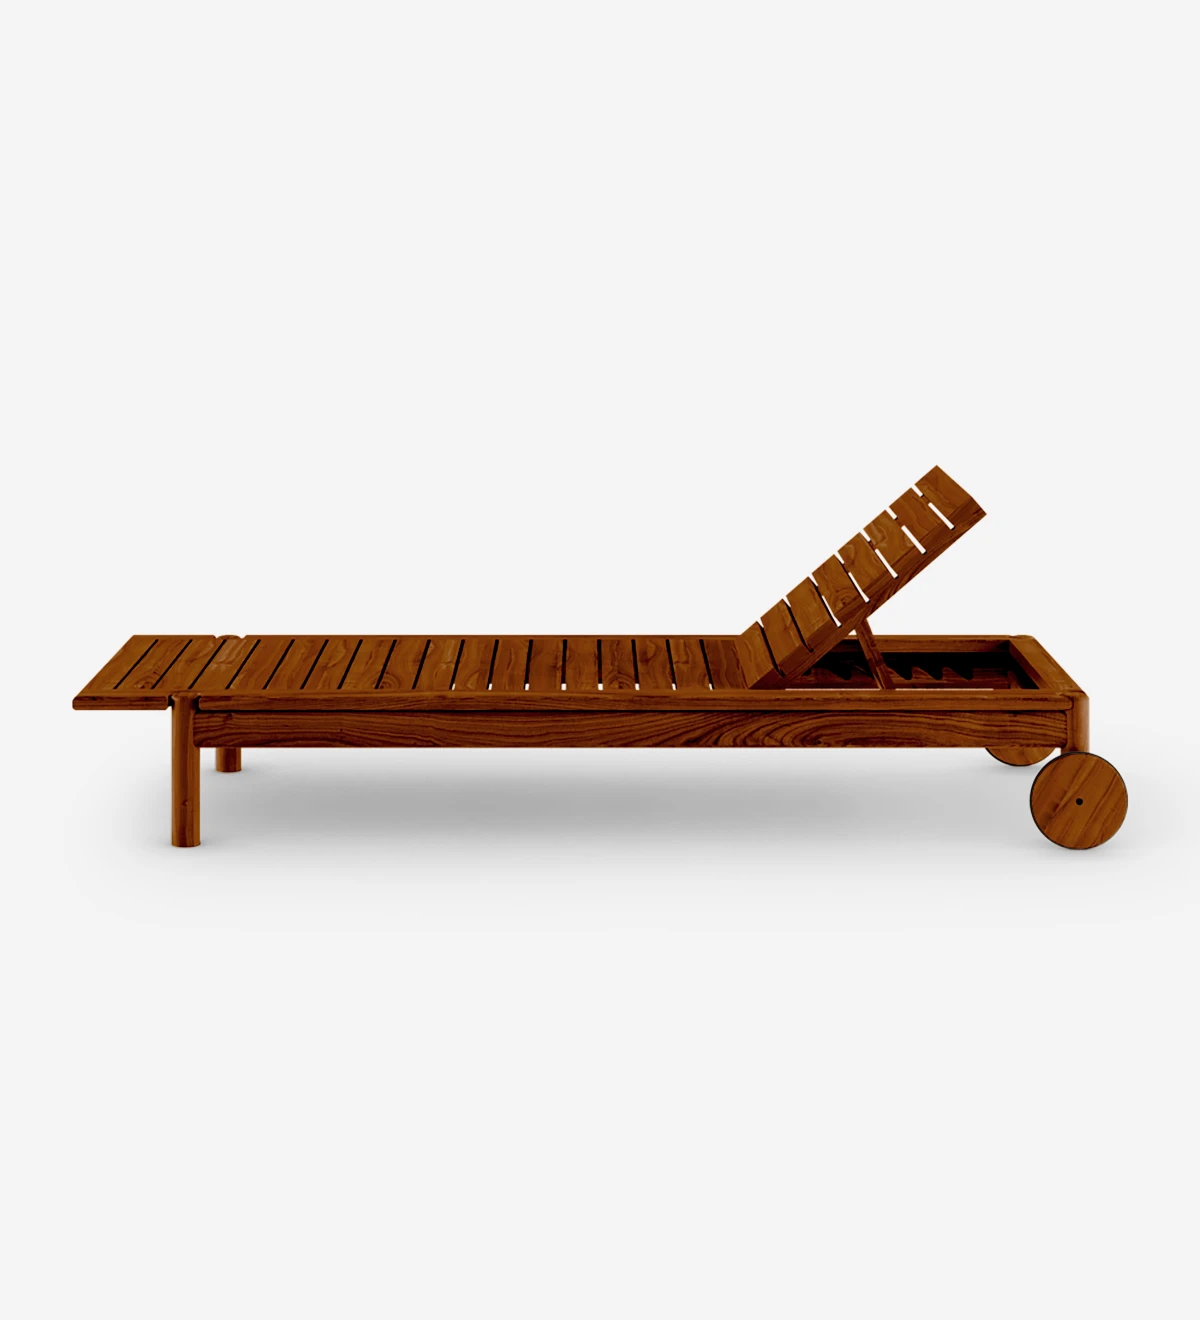 Lounger with fabric upholstered cushion and structure in honey-colored natural wood.